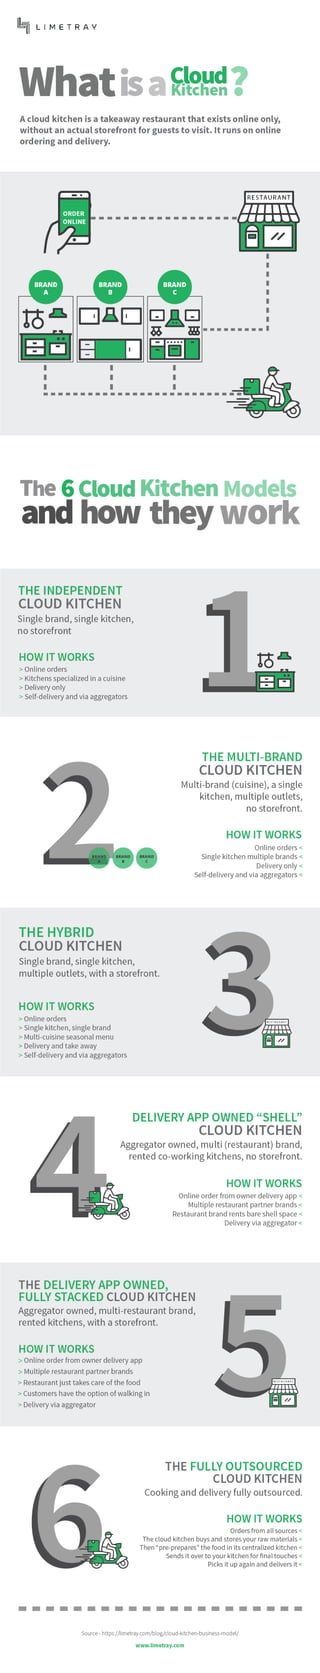 The 6 Cloud Kitchen Business Models and How They Work